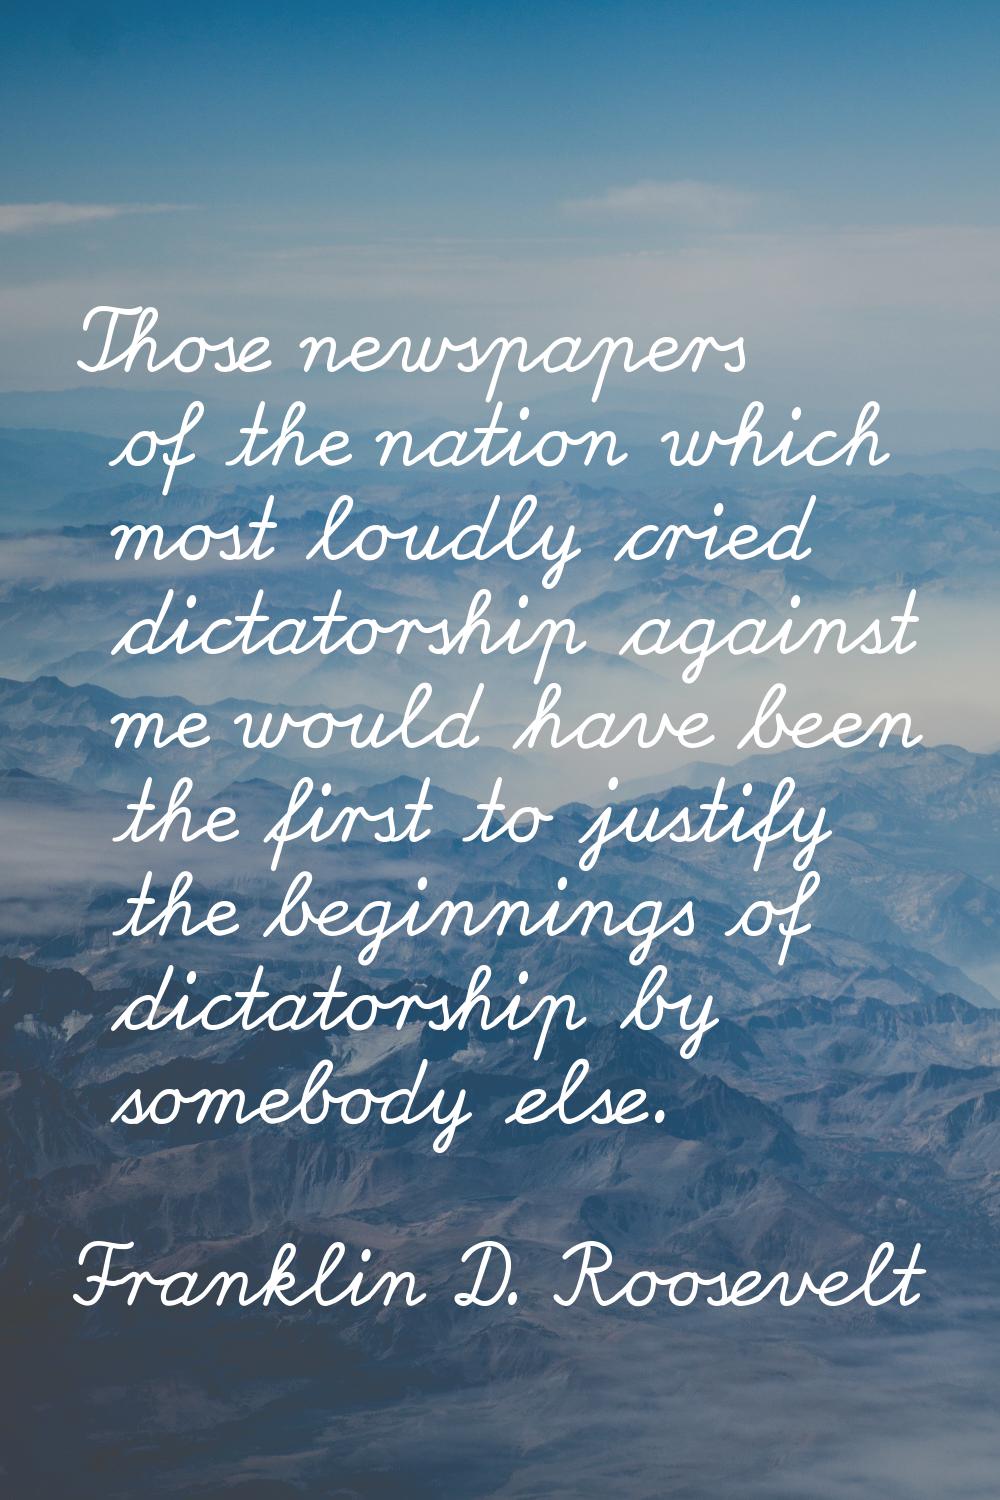 Those newspapers of the nation which most loudly cried dictatorship against me would have been the 